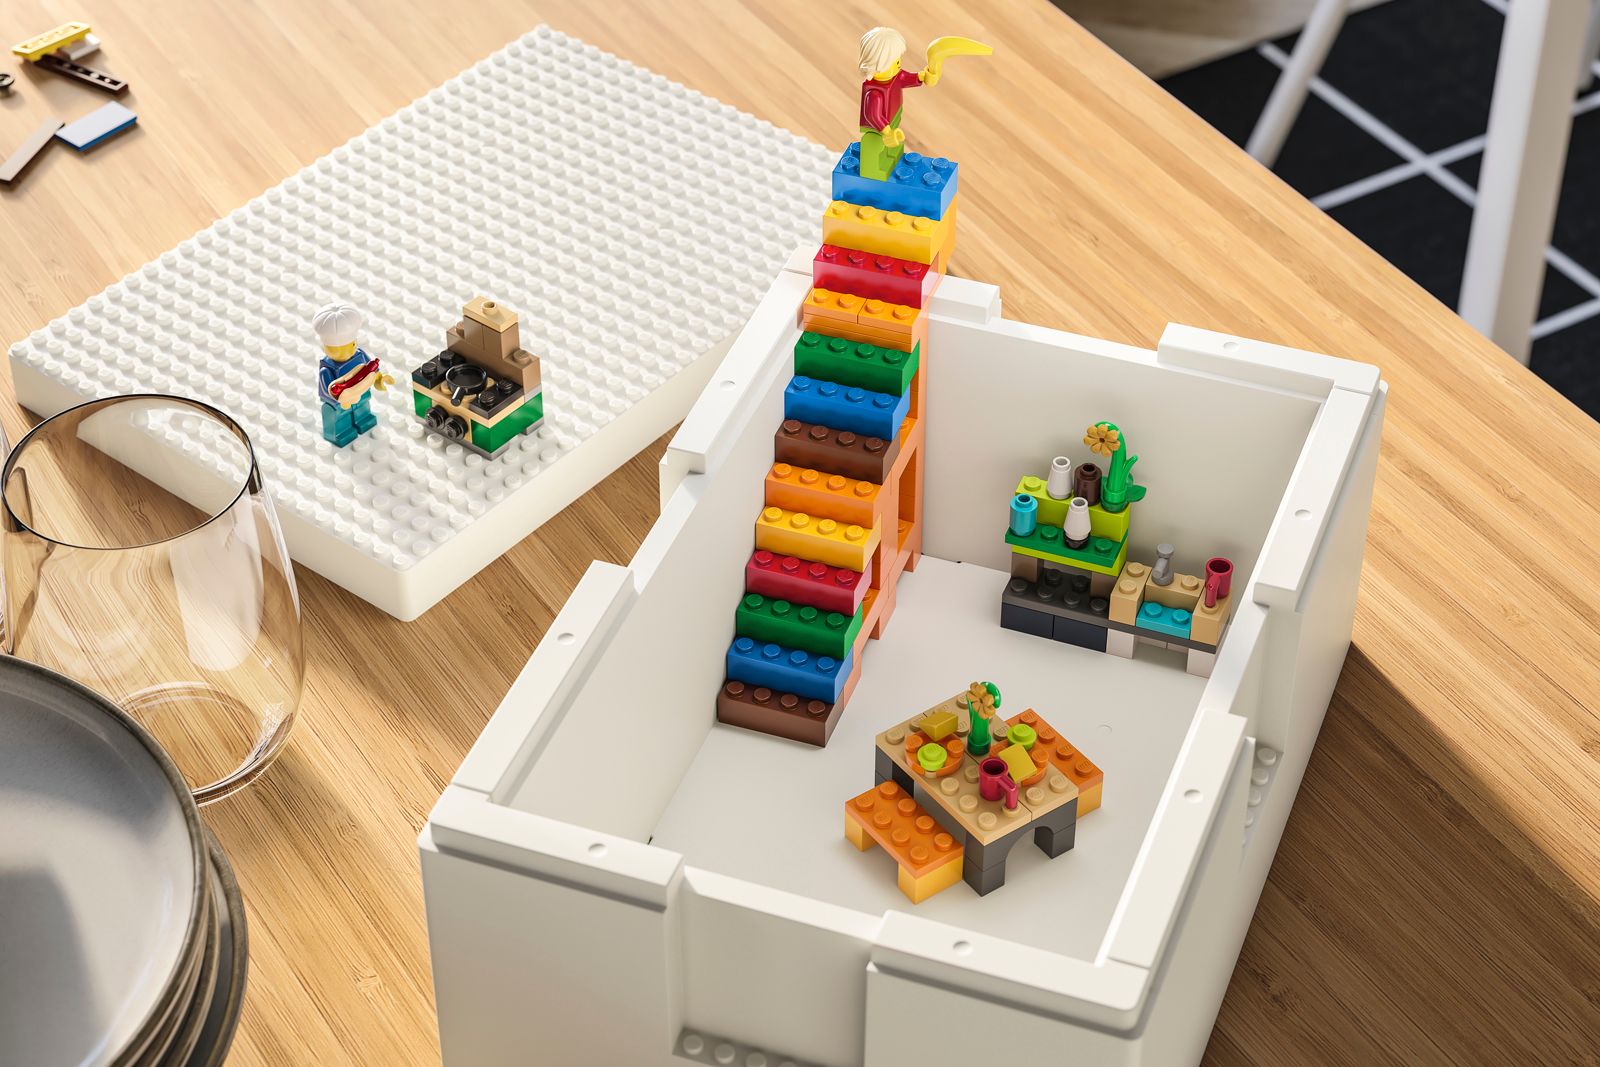 Ikea and Lego team up for storage boxes you can build on photo 1